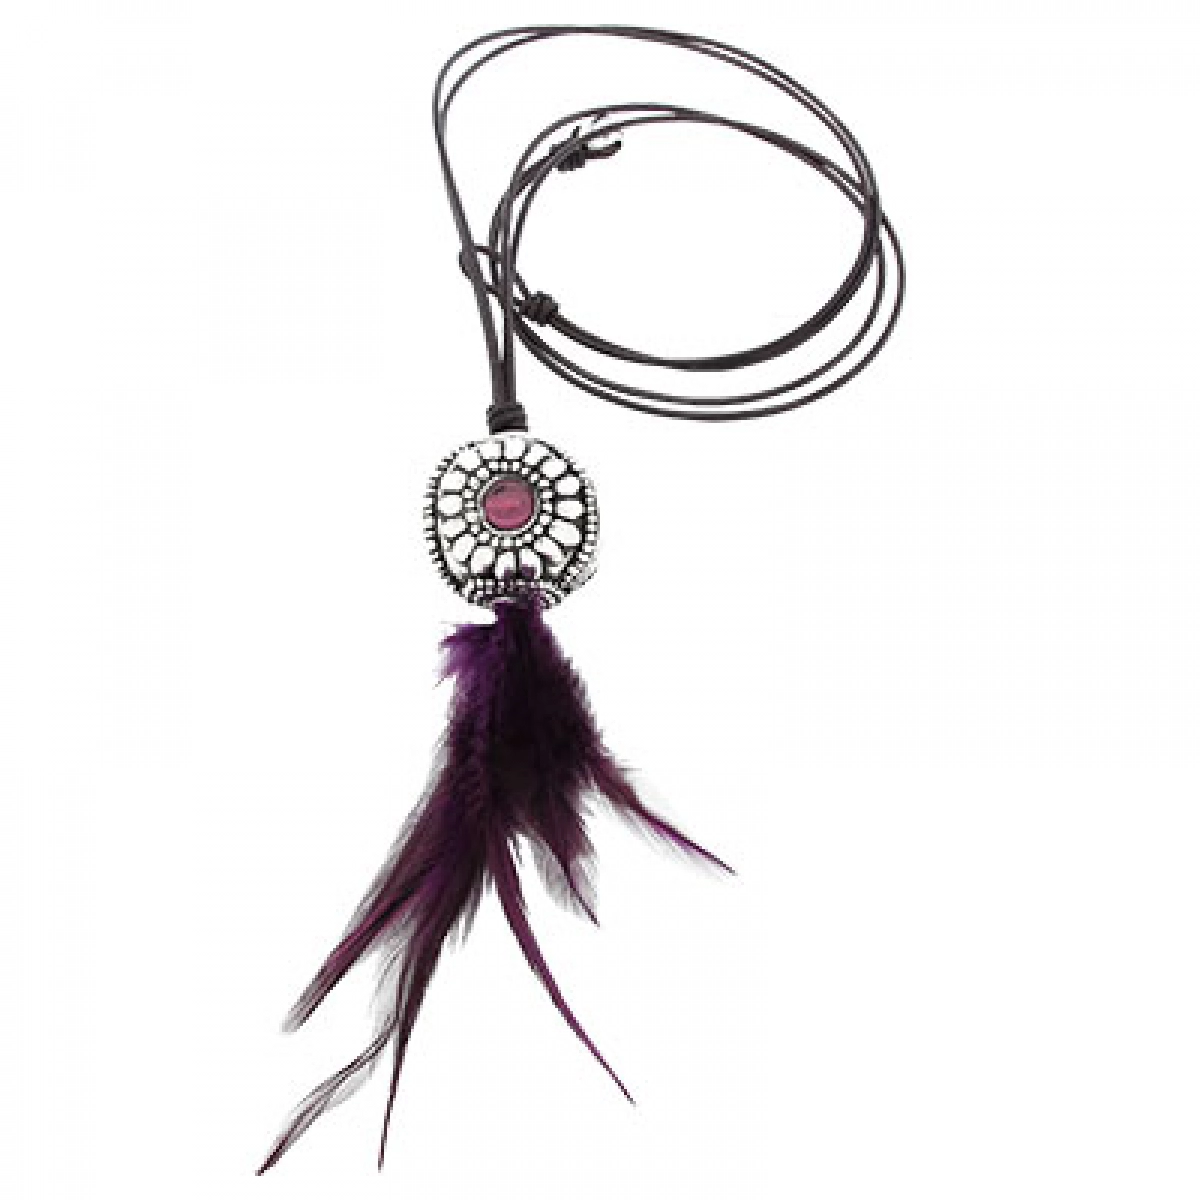 PPC121 NATURAL FEATHERS PURE SILVER NECKLACE Plata Pura